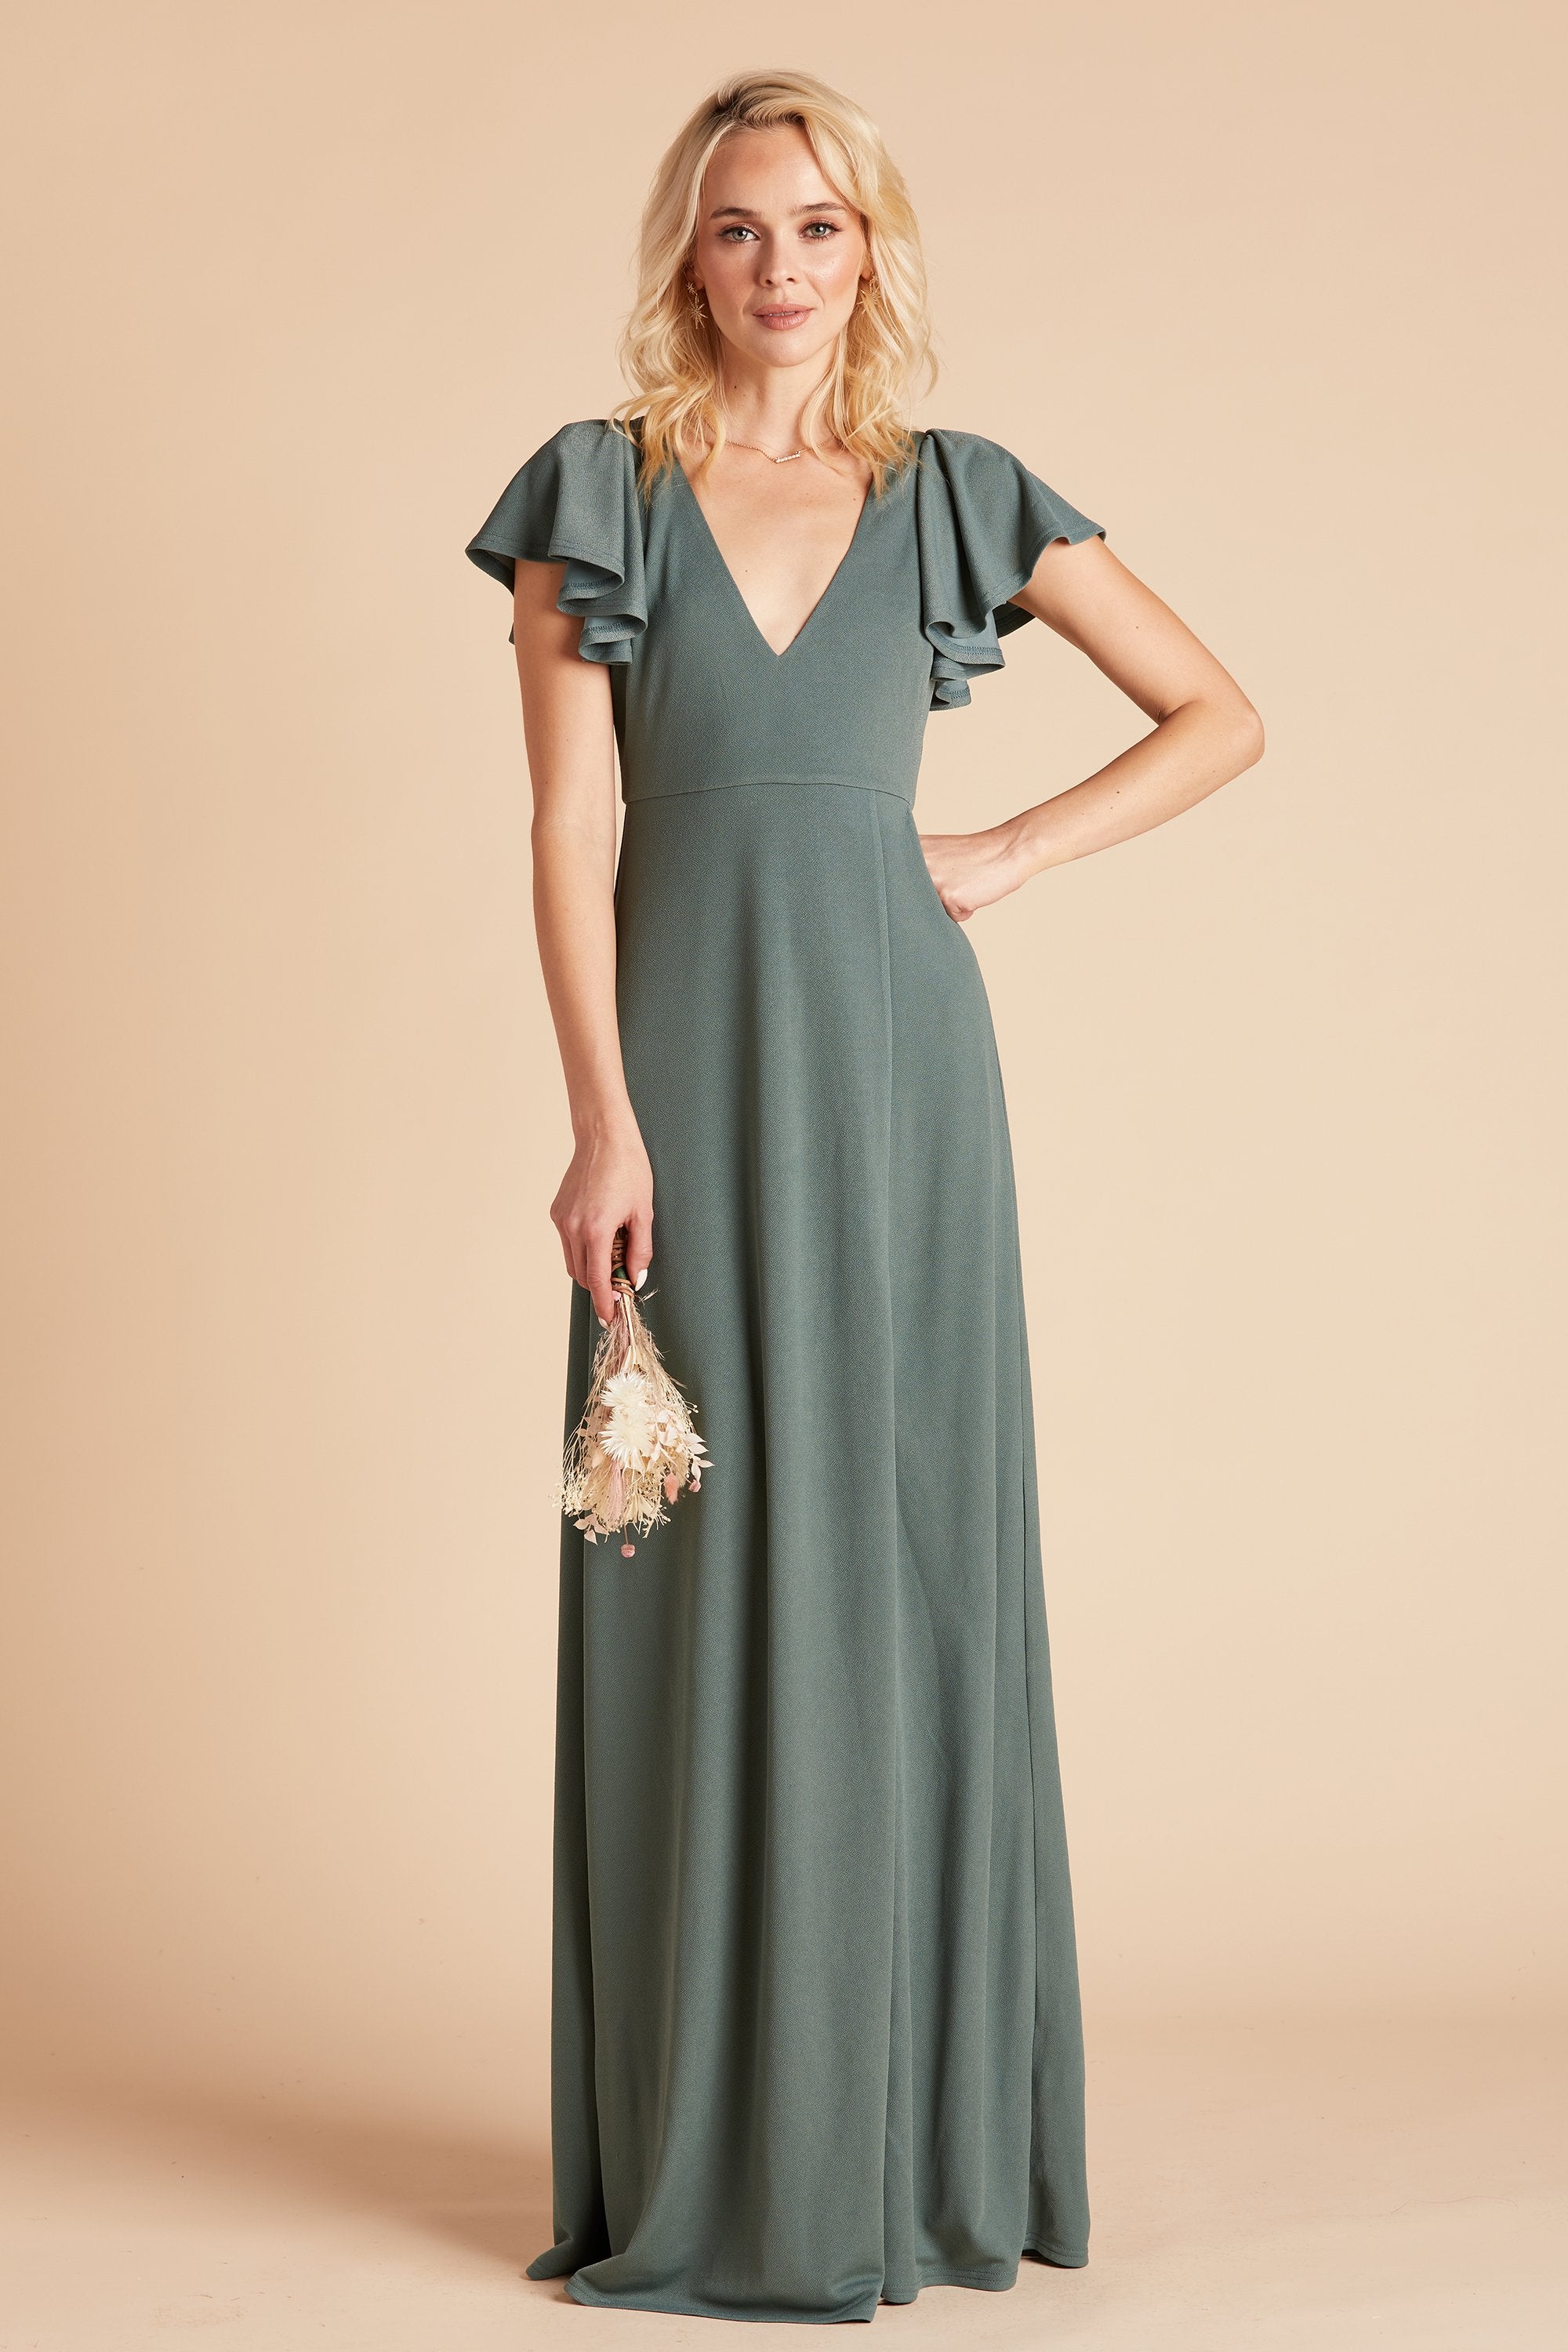 Hannah bridesmaid dress in sea glass crepe by Birdy Grey, front view